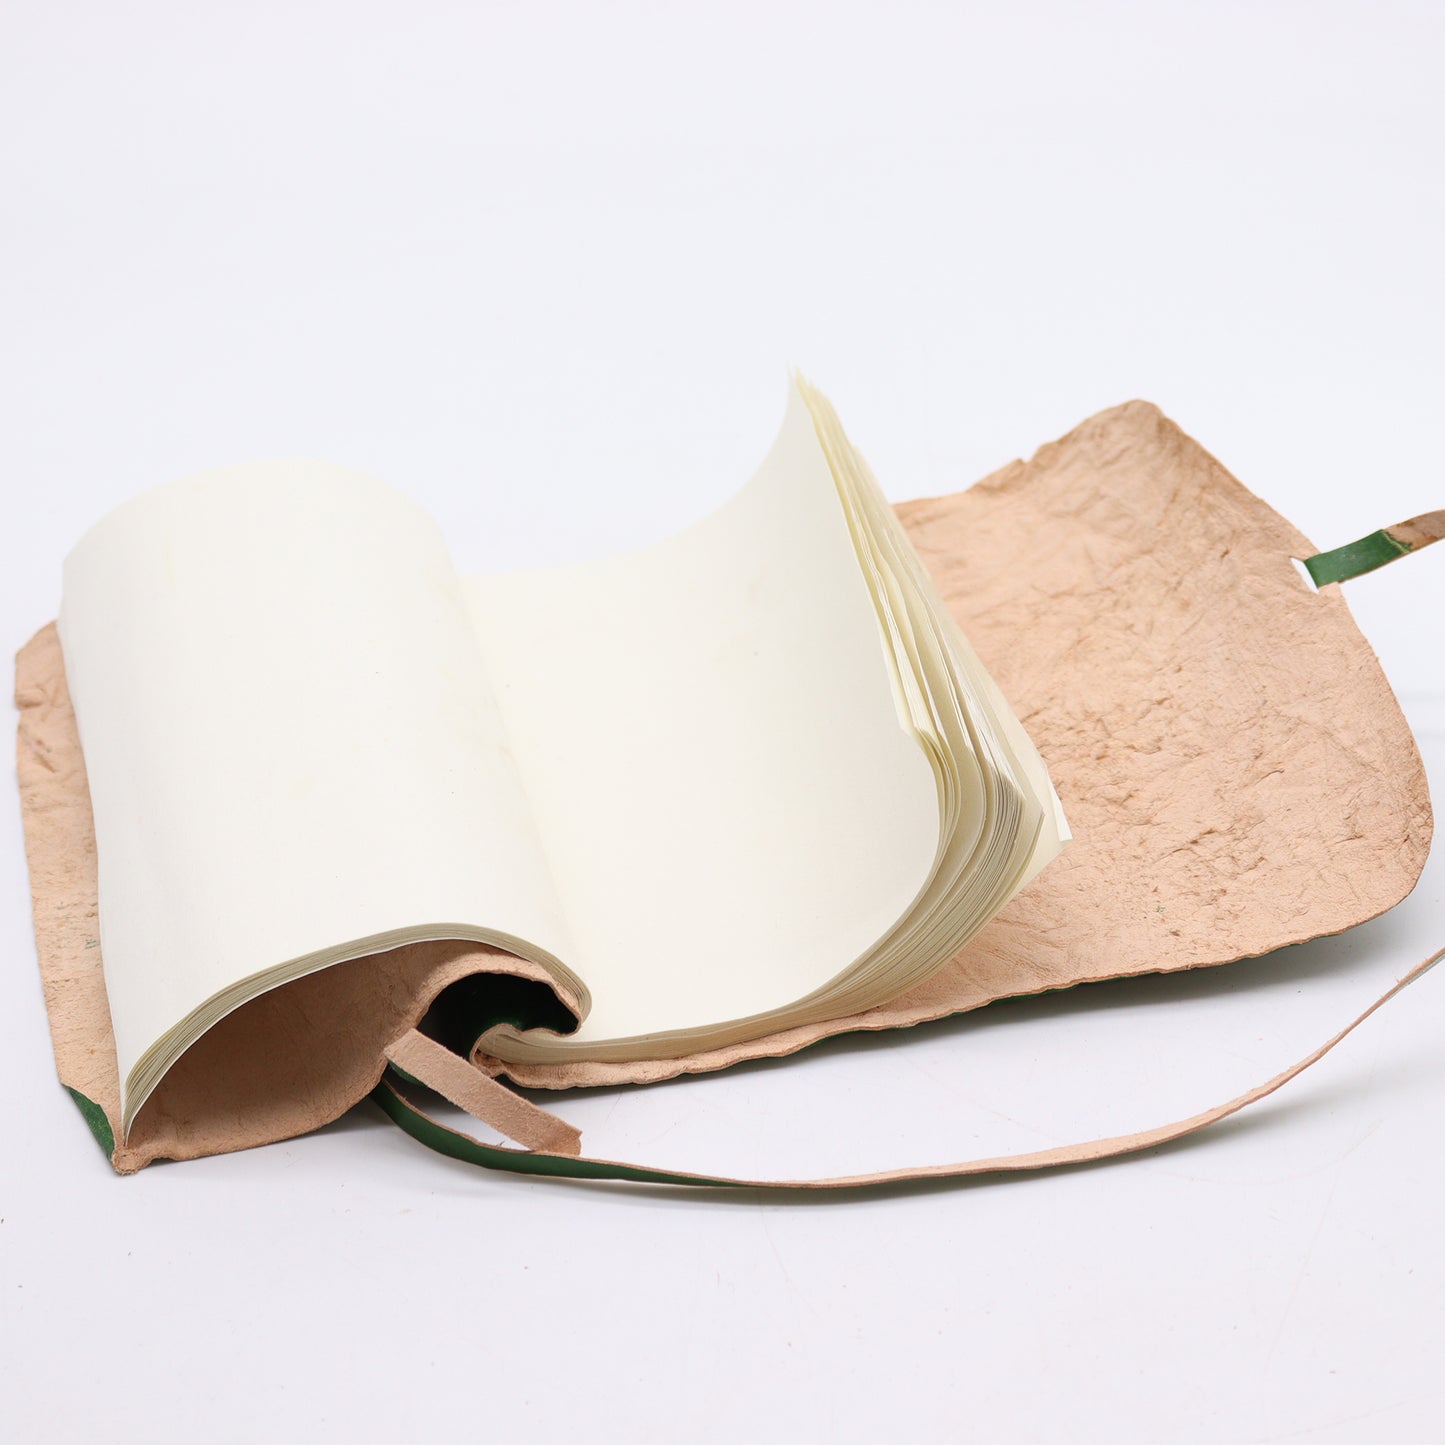 Rolled Leather Travel Notebook - 96 pages - Green  21x15cm